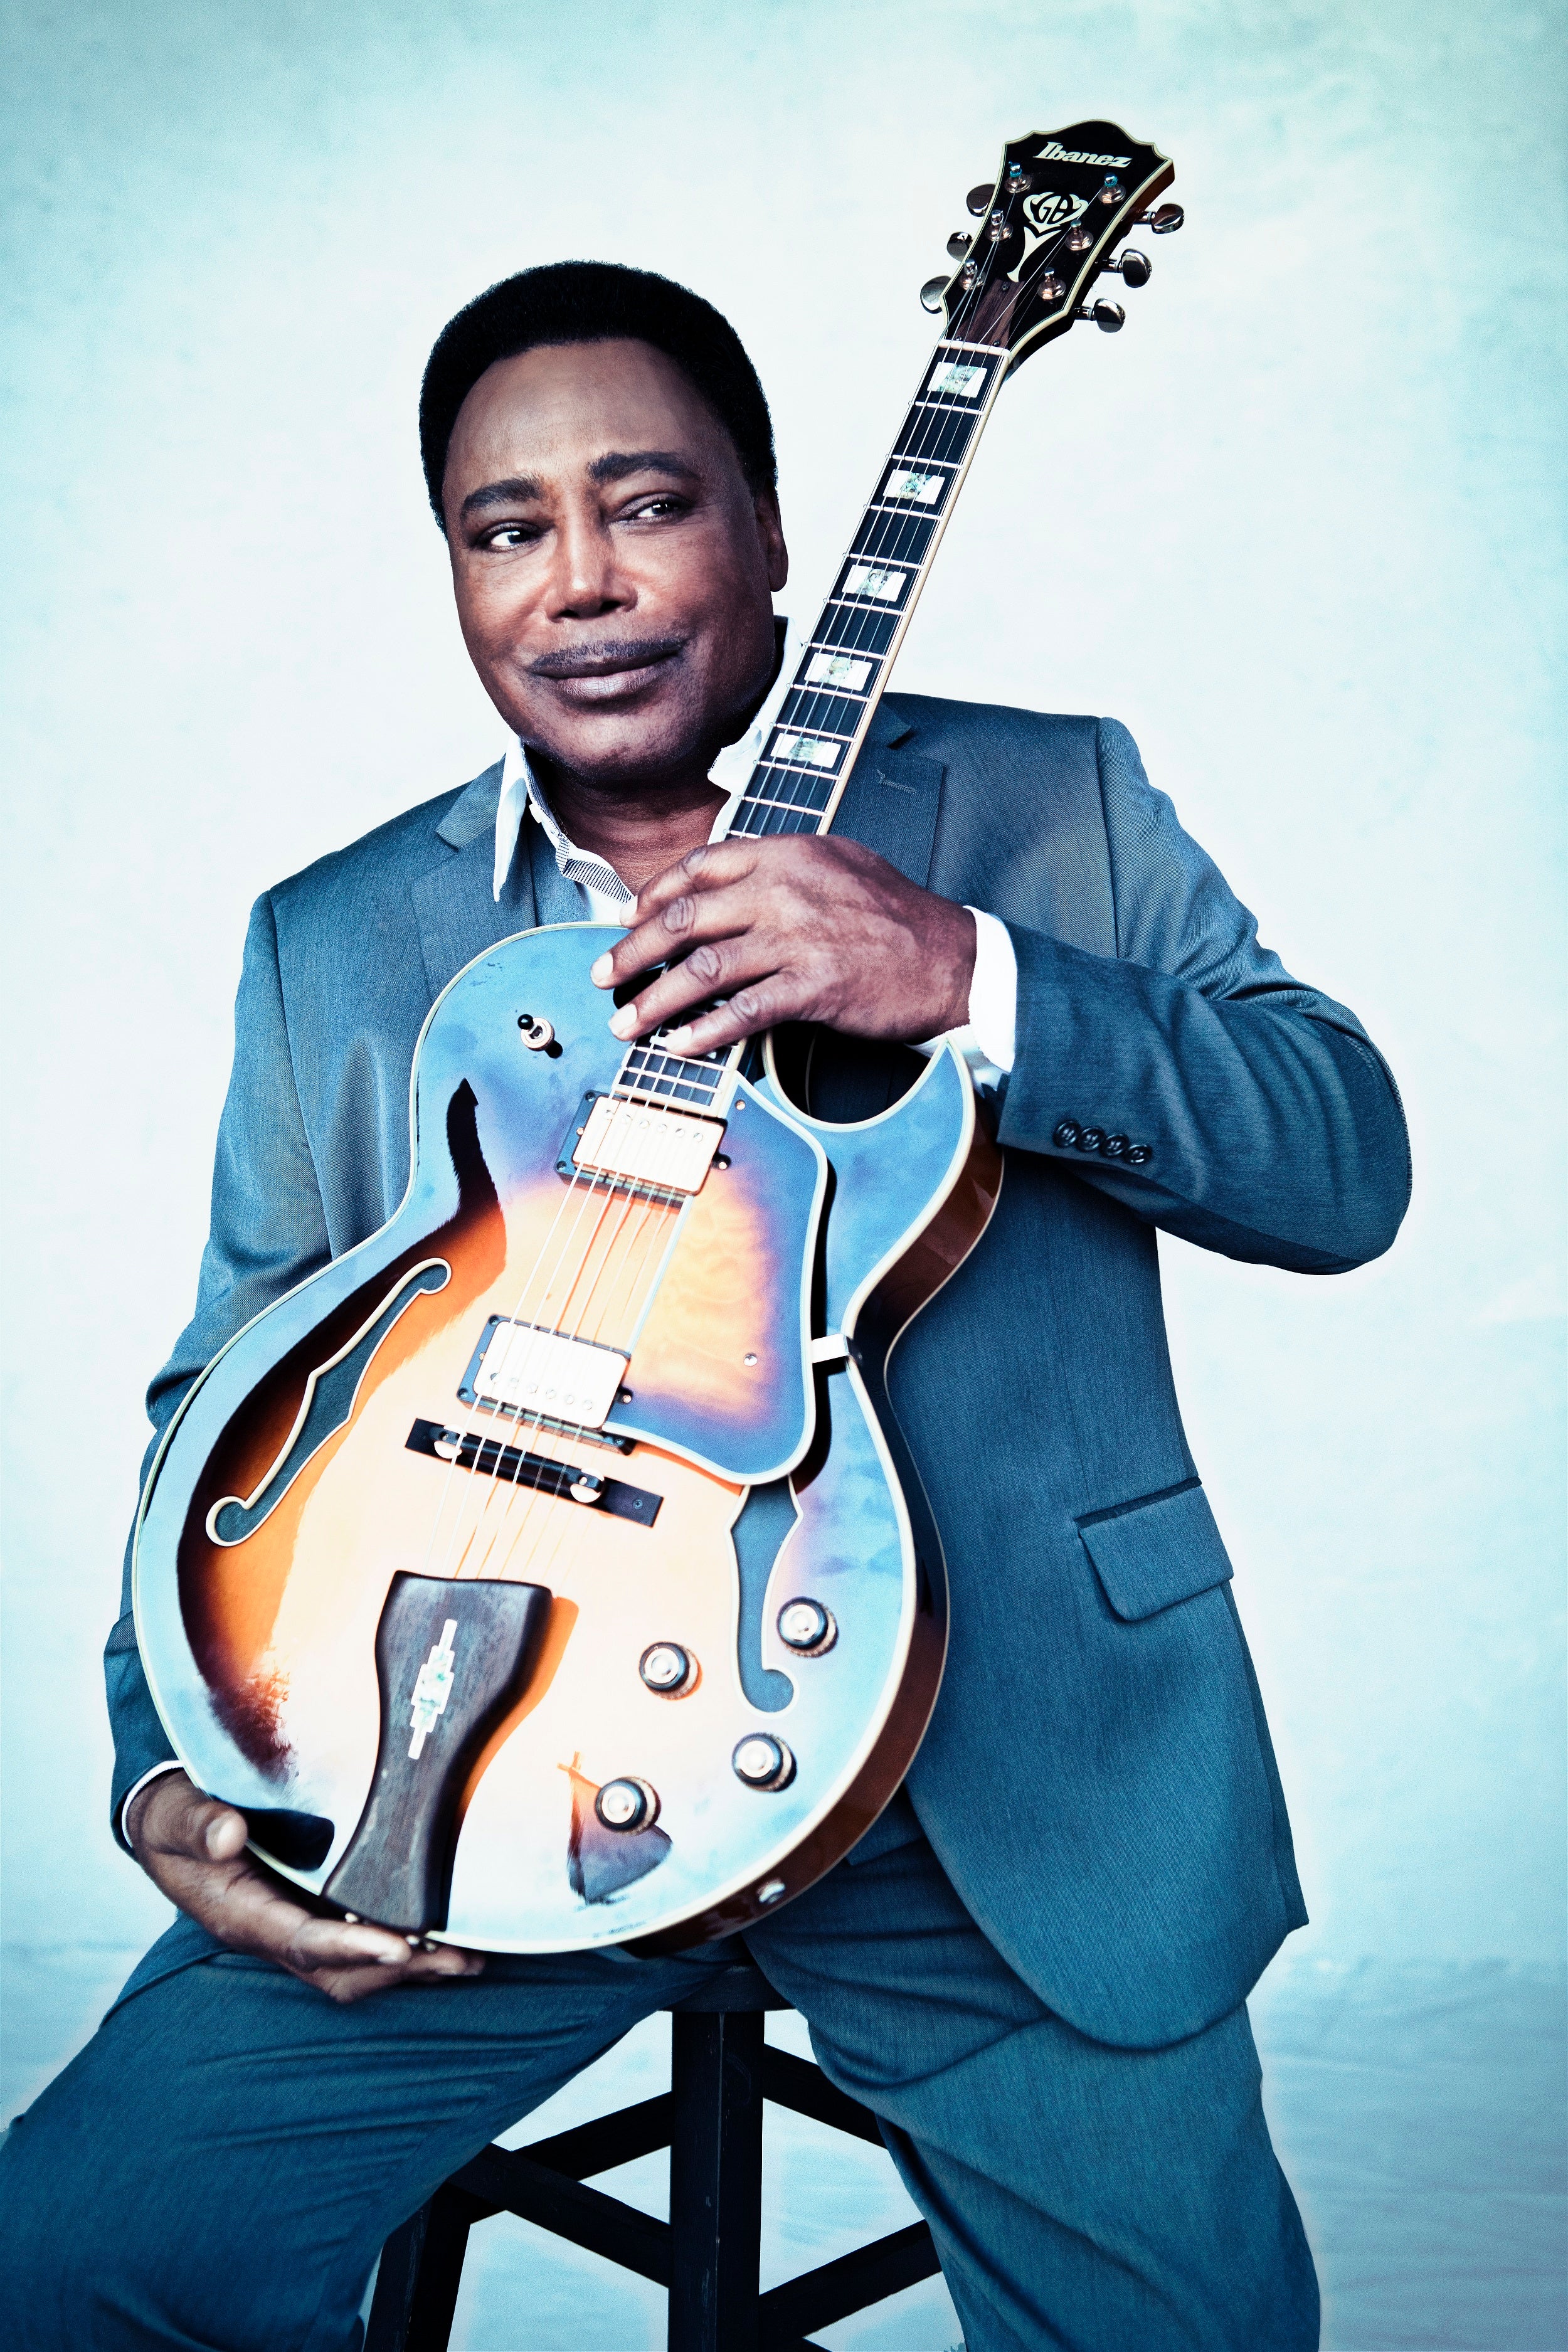 George Benson in Leeds promo photo for Three presale offer code